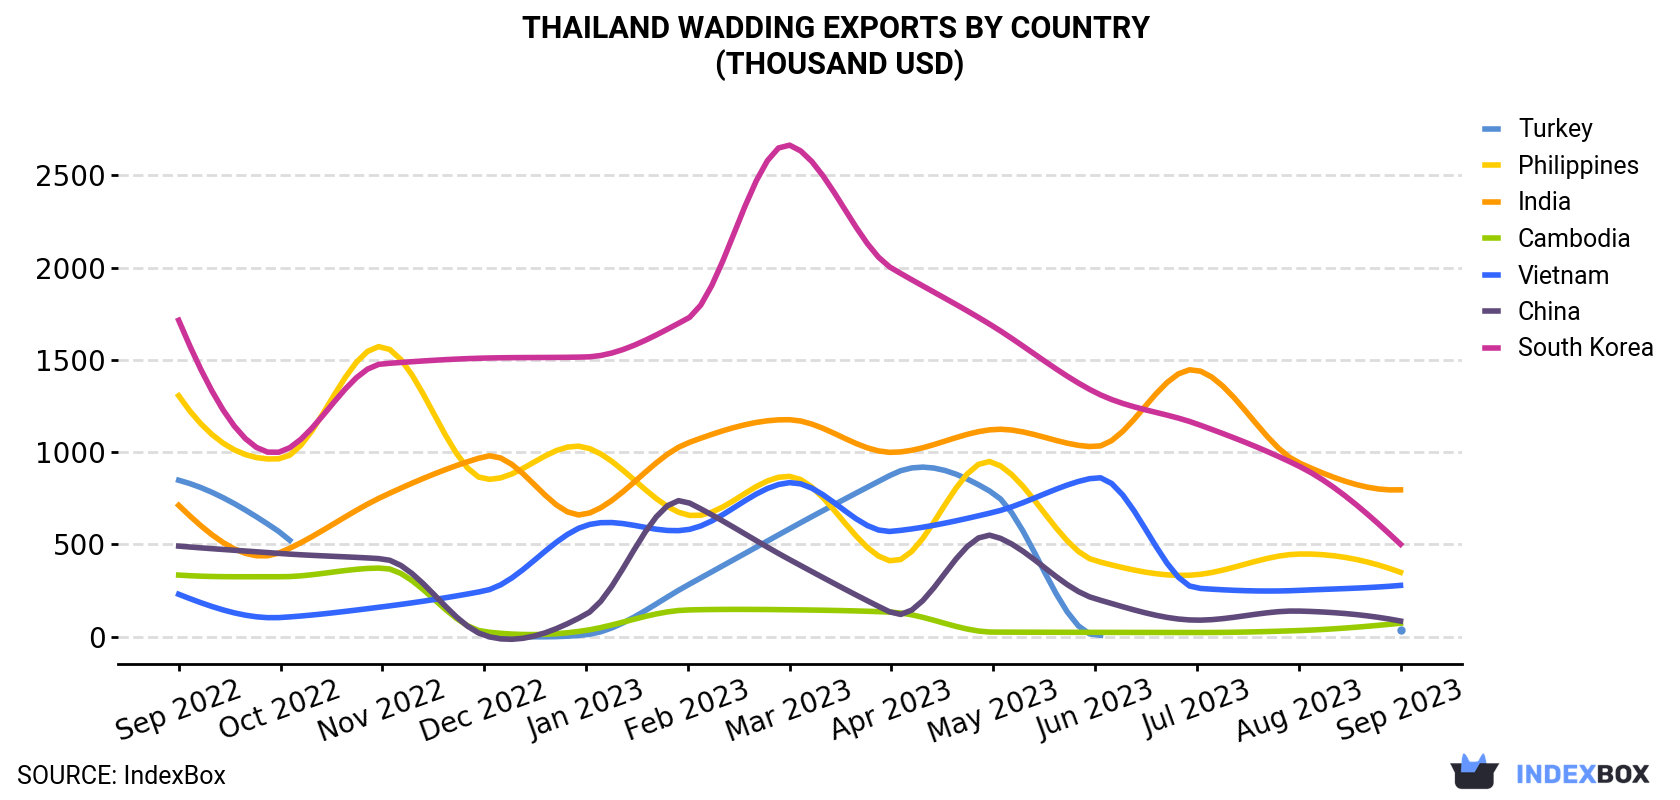 Thailand Wadding Exports By Country (Thousand USD)